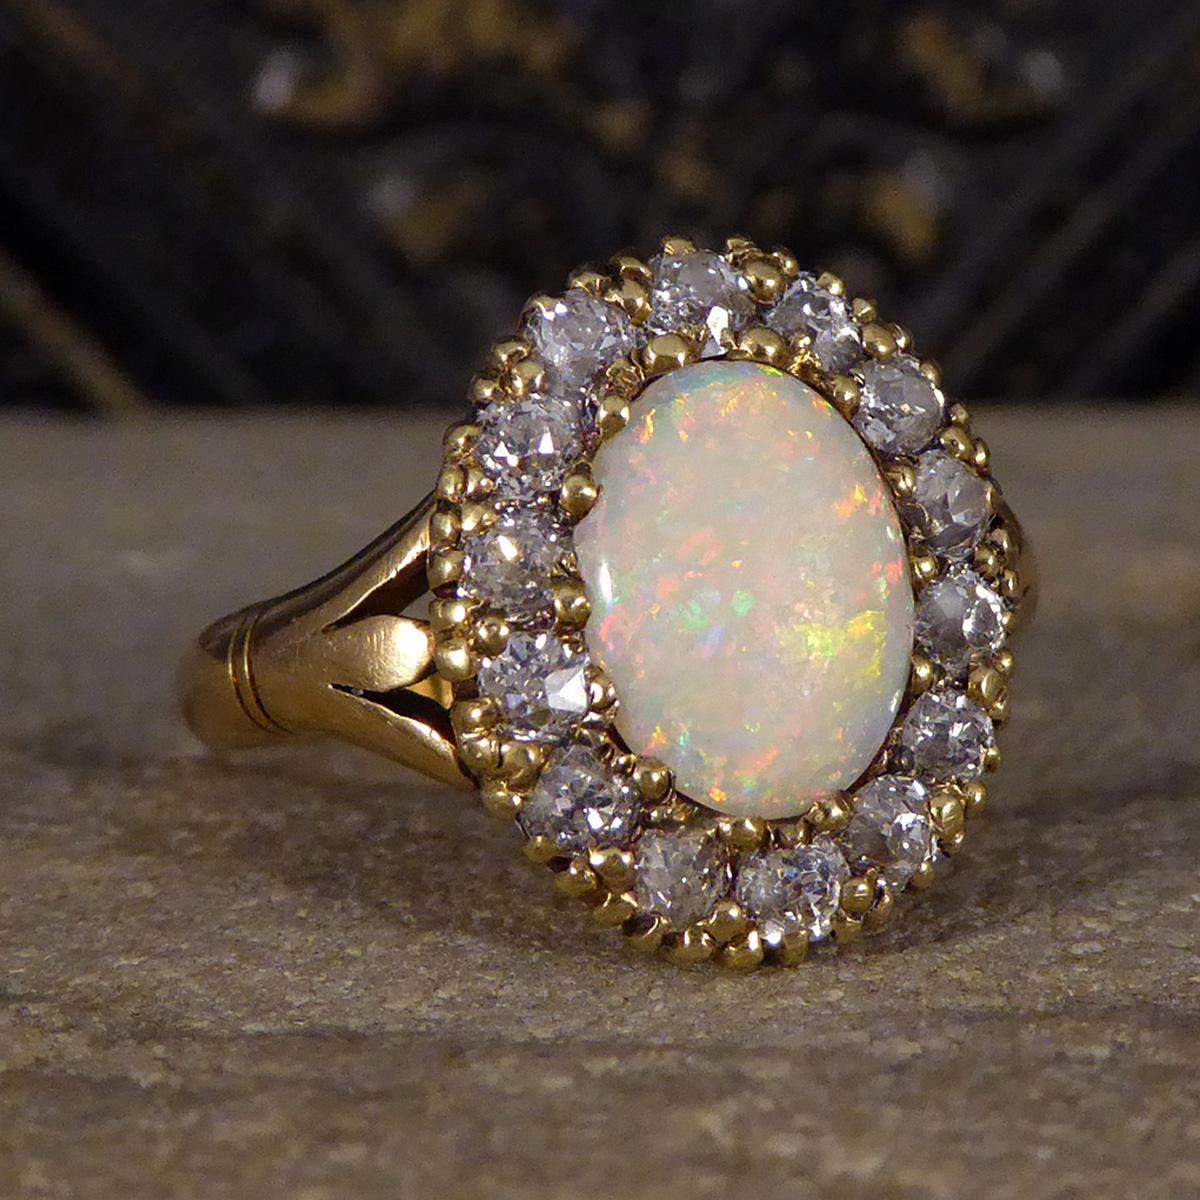 A classic antique cluster ring hand crafted with great care in the Late Victorian era. Featuring in this ring is bright and colourful oval shaped Opal. The Opal projects a reds and oranges with flashes of green and blue as the light hits the stone